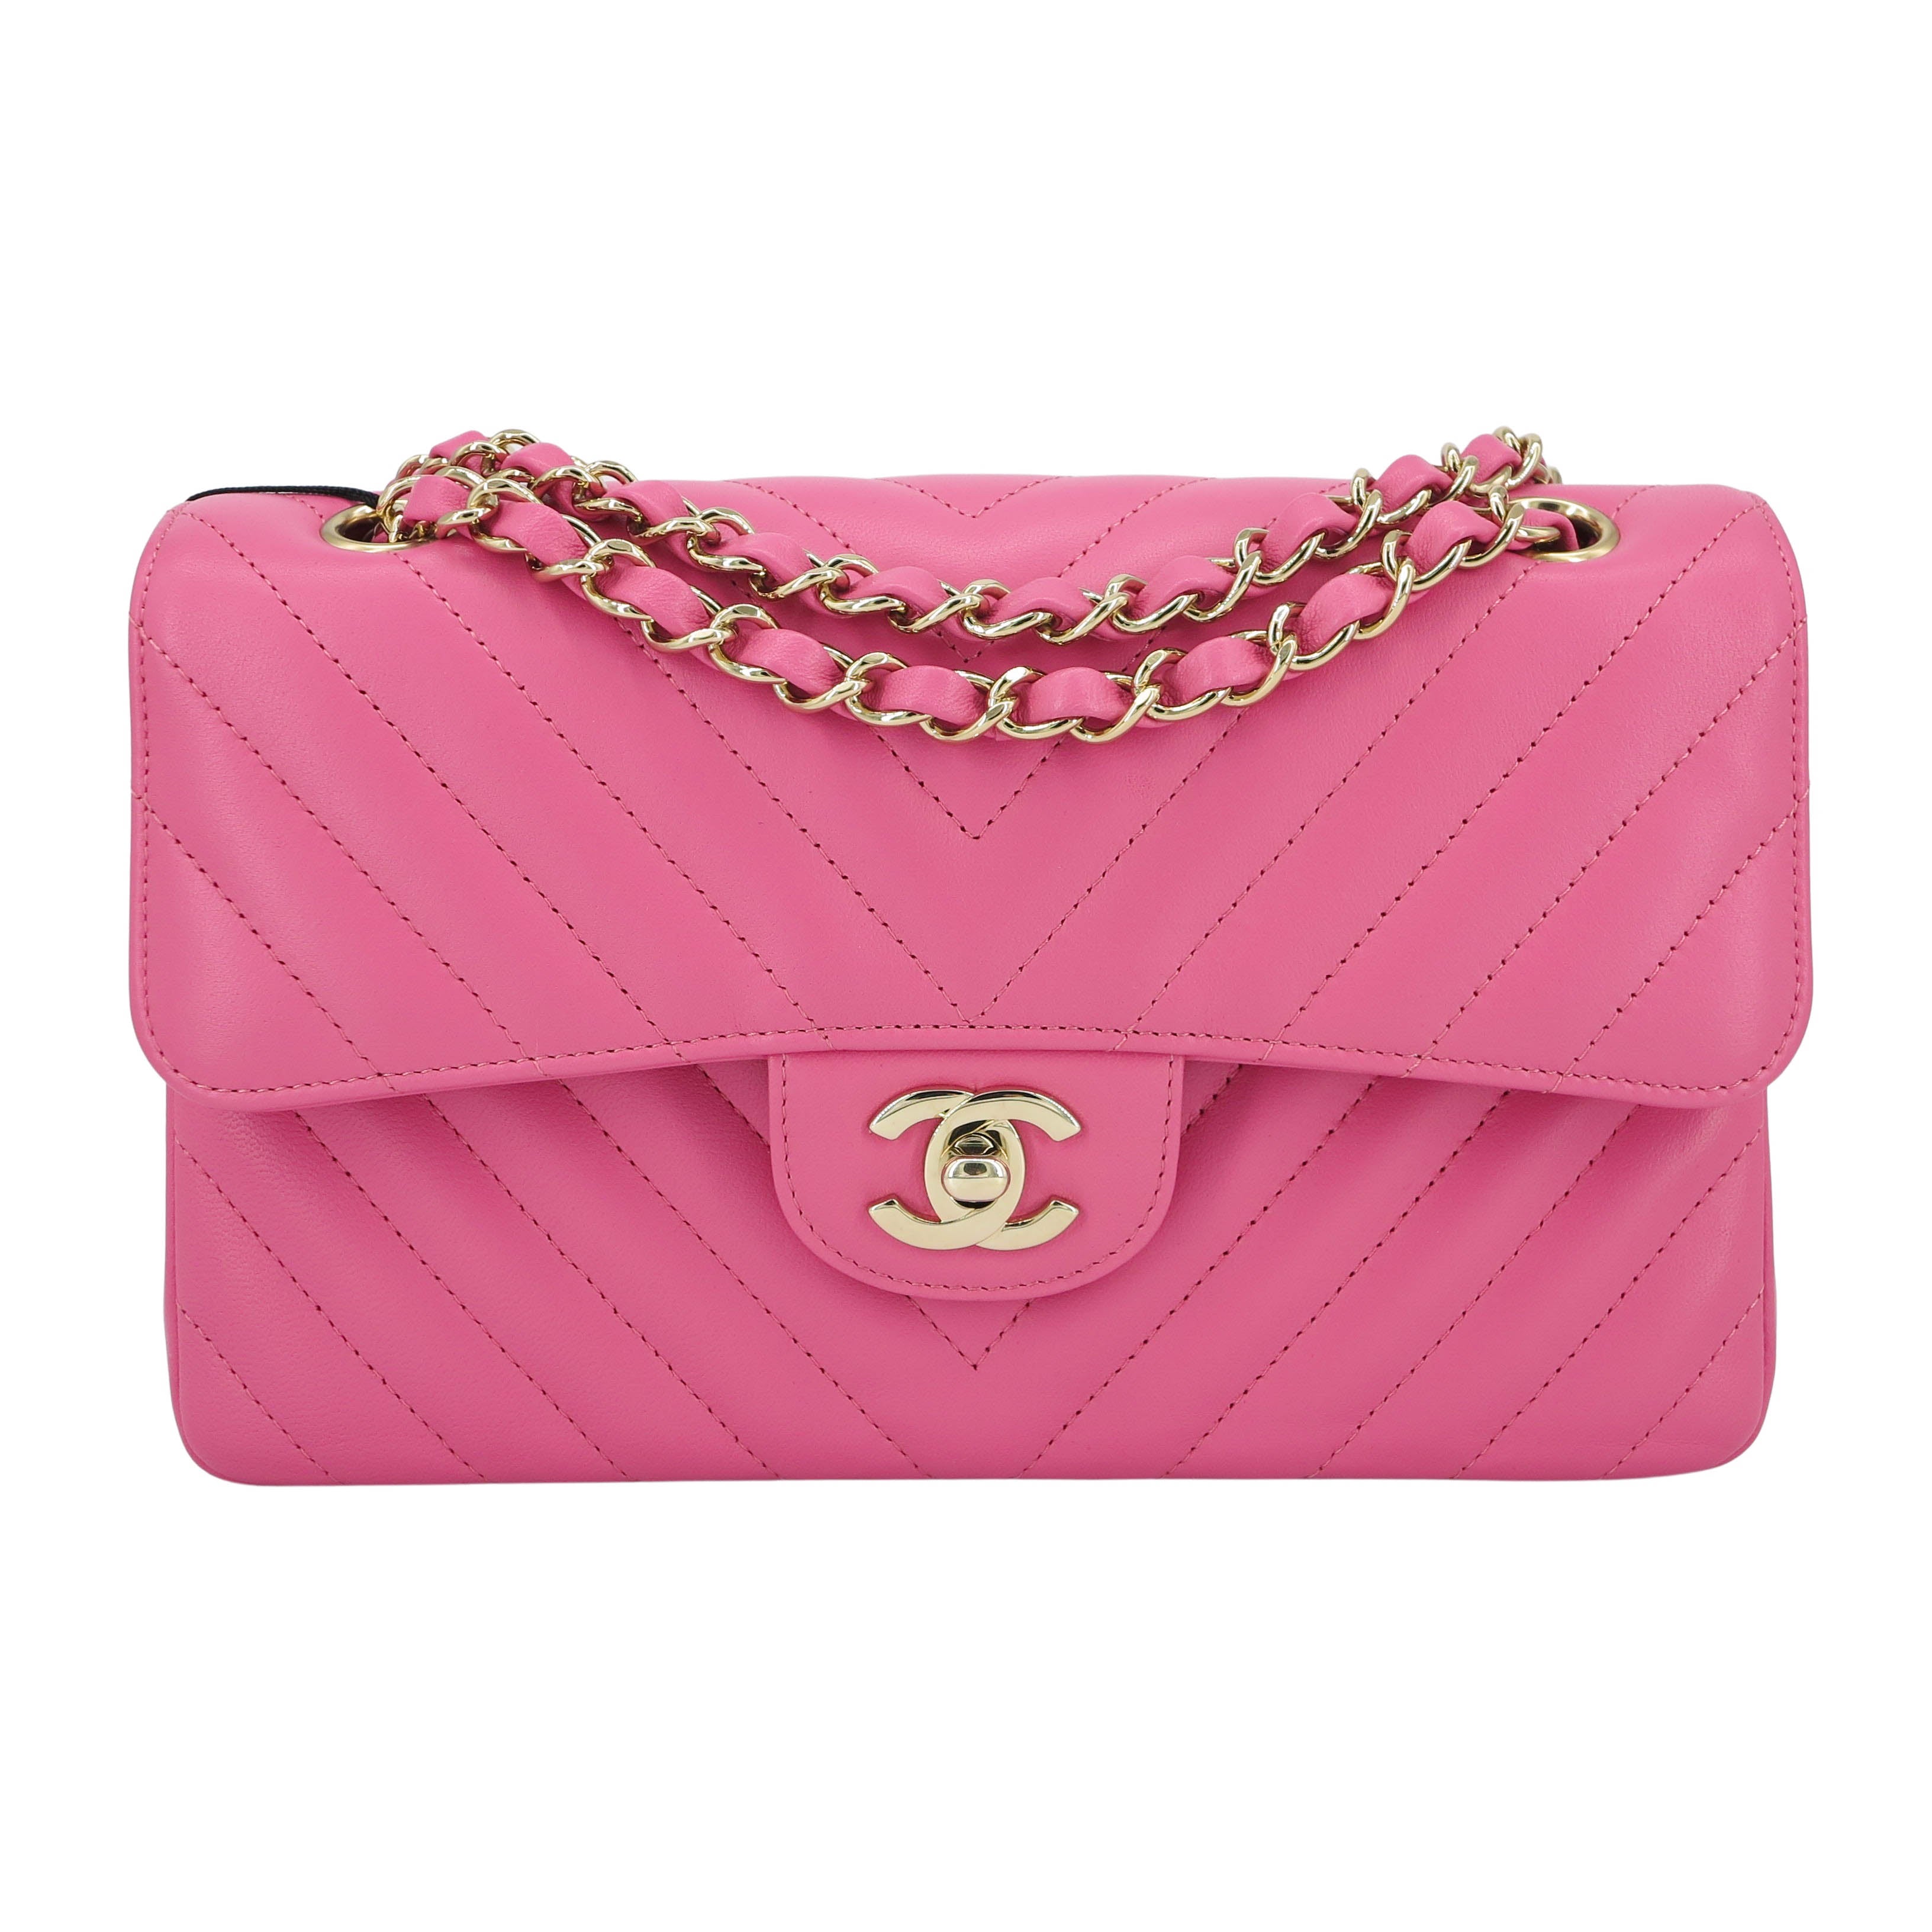 pink and gold chanel bag black